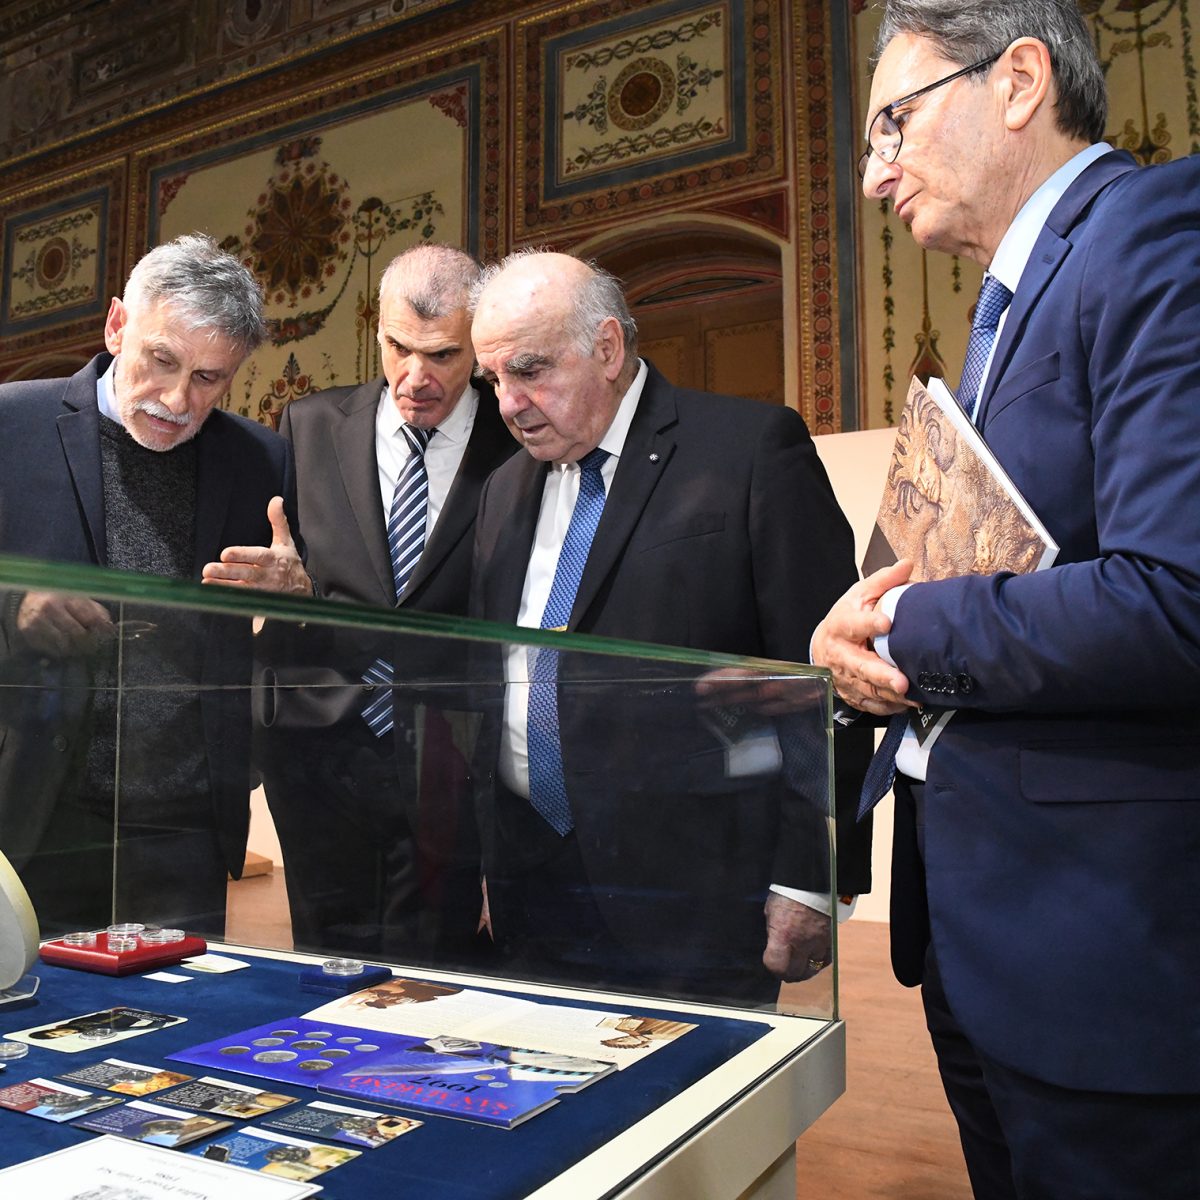 BOV RETROSPECTIVE EXHIBITION FEATURING WORKS BY NOEL GALEA BASON OFFICIALLY INAUGURATED